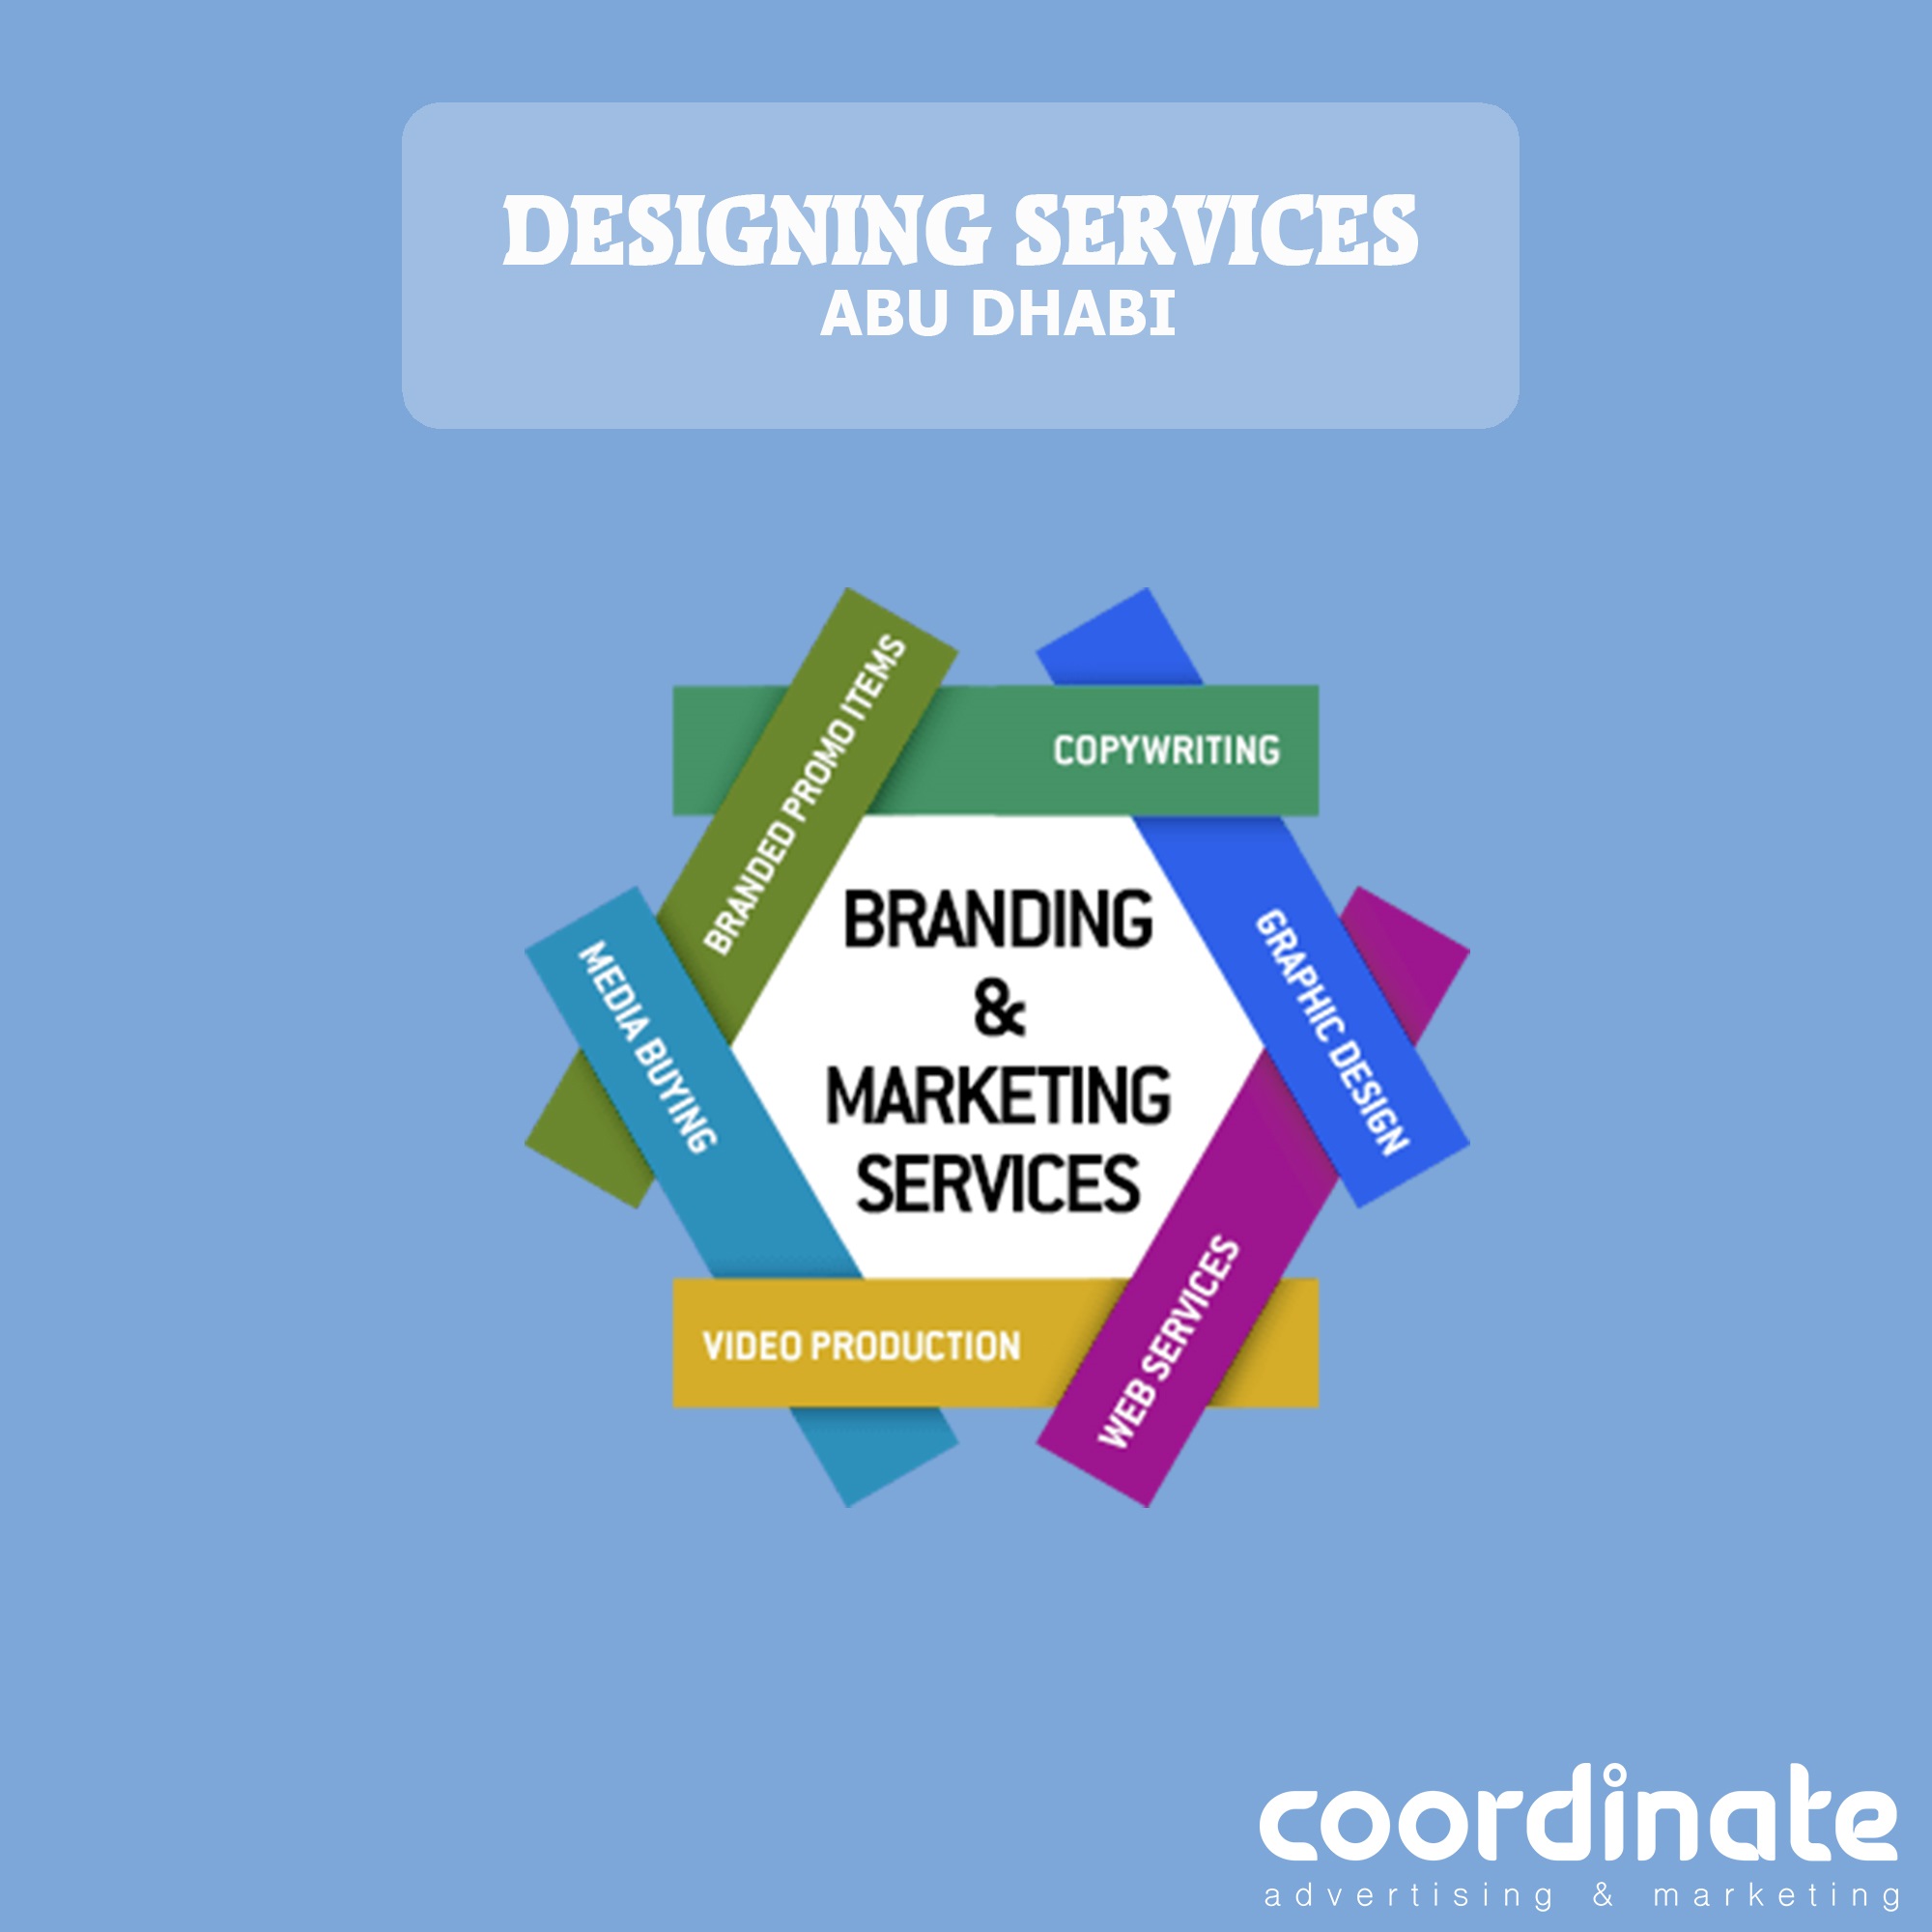 DESIGNING SERVICES Abu Dhabi | Coordinate advertising and marketing agency